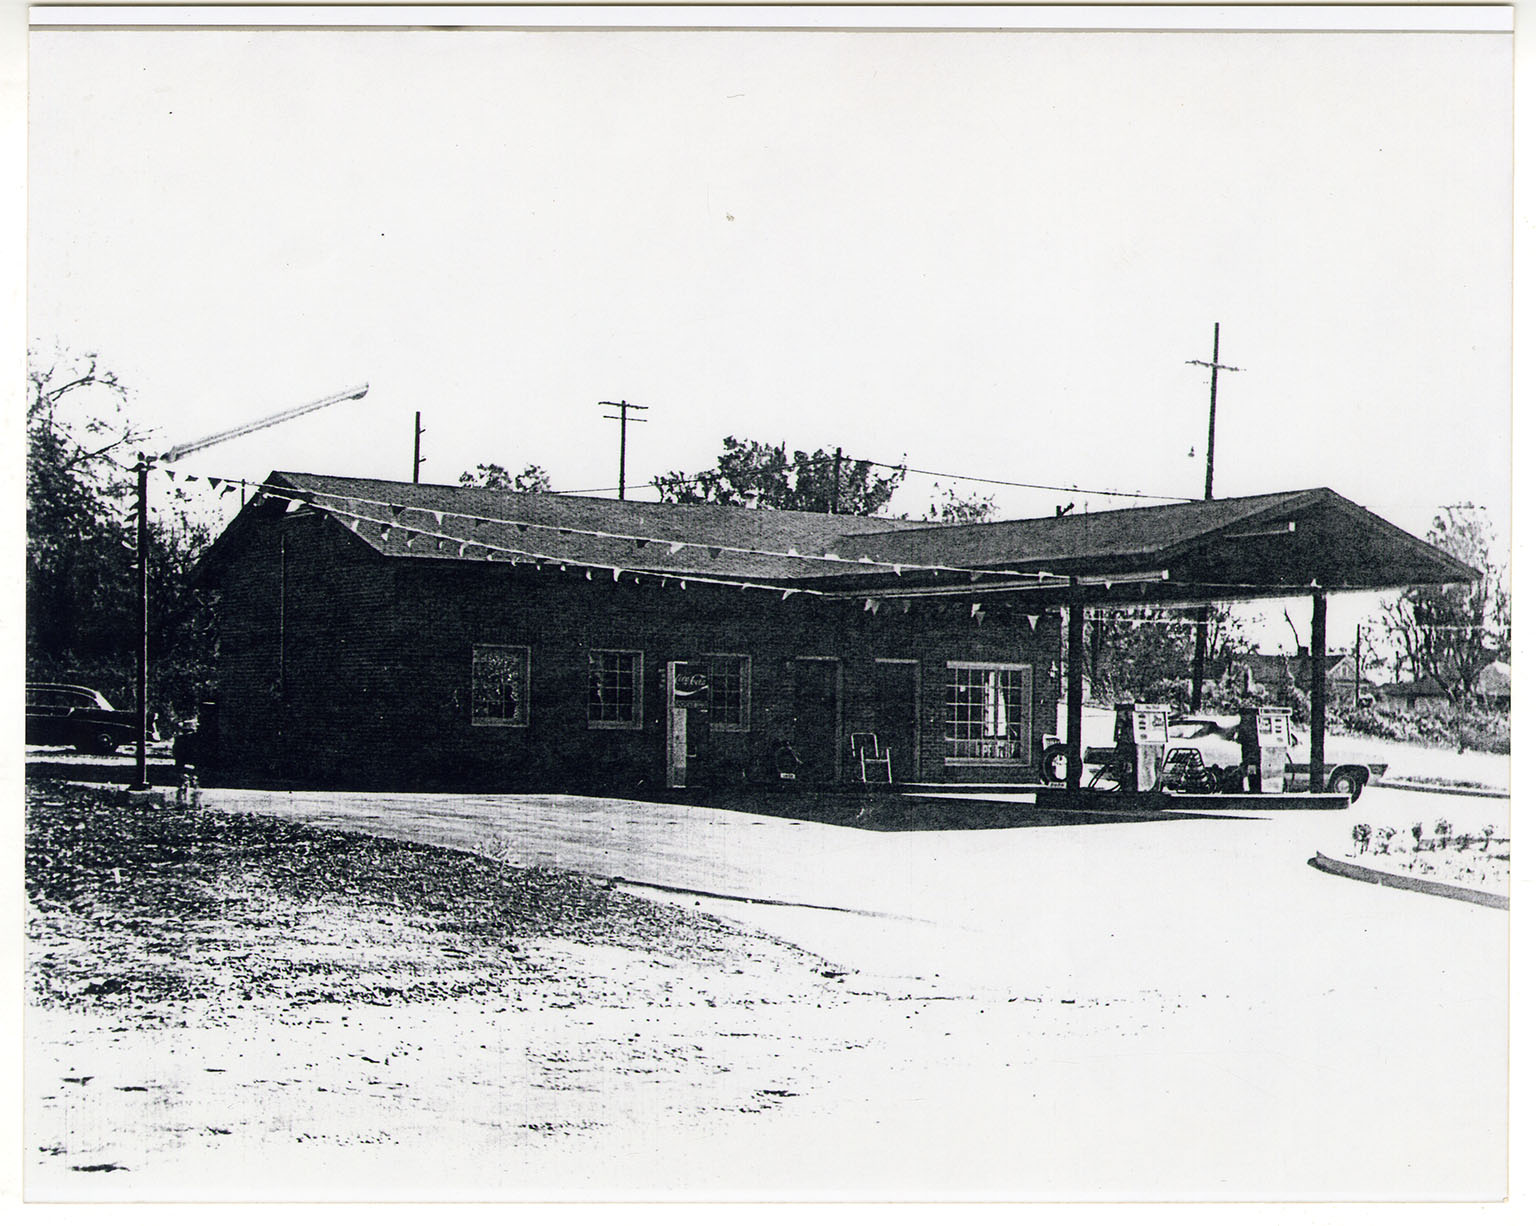 Tom Mill's Service Station: Courtesy of the WU Pettus Archives - 2024